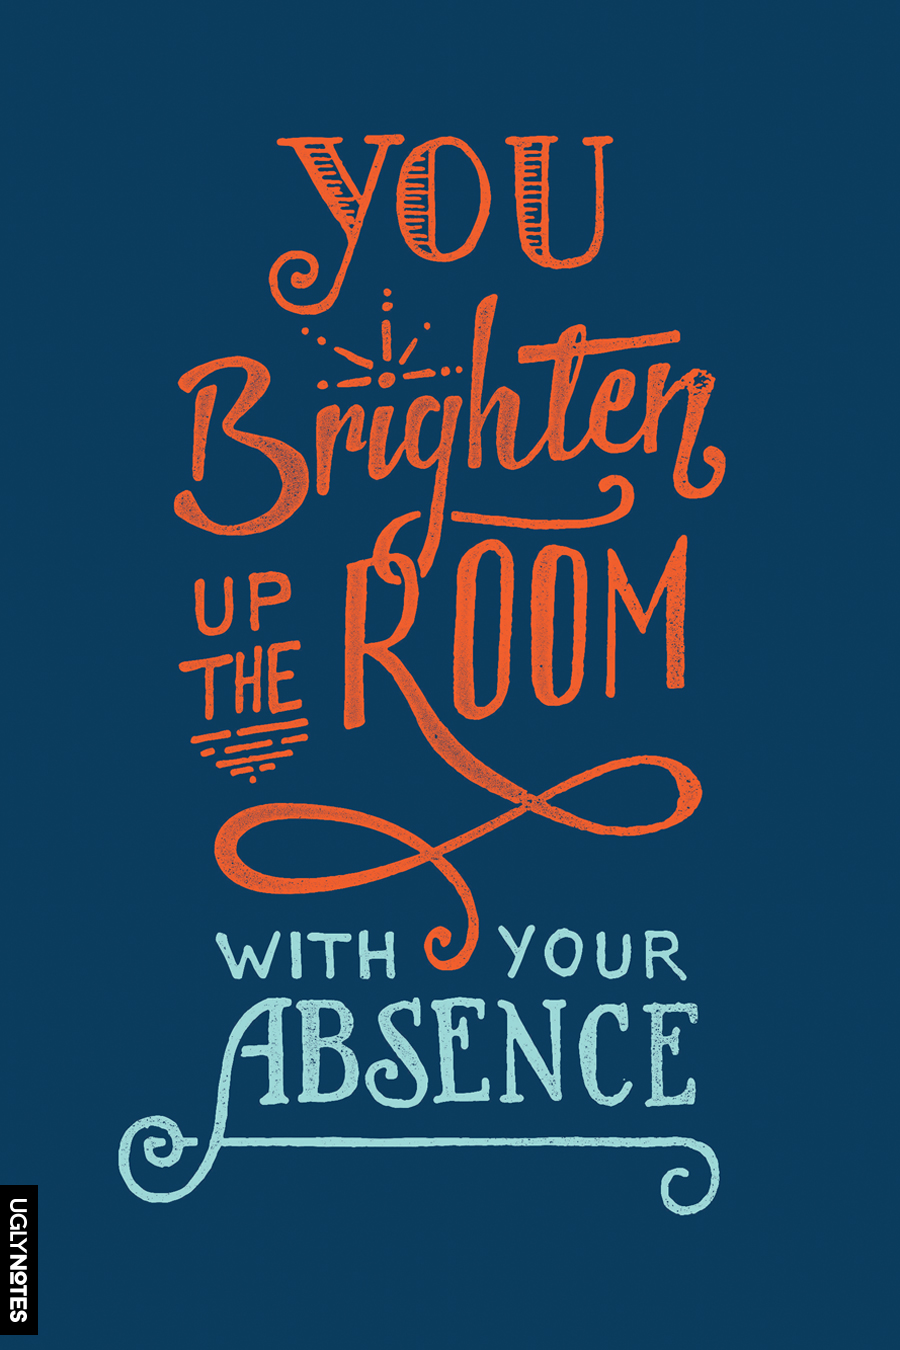 You brighten up the room with your absence.